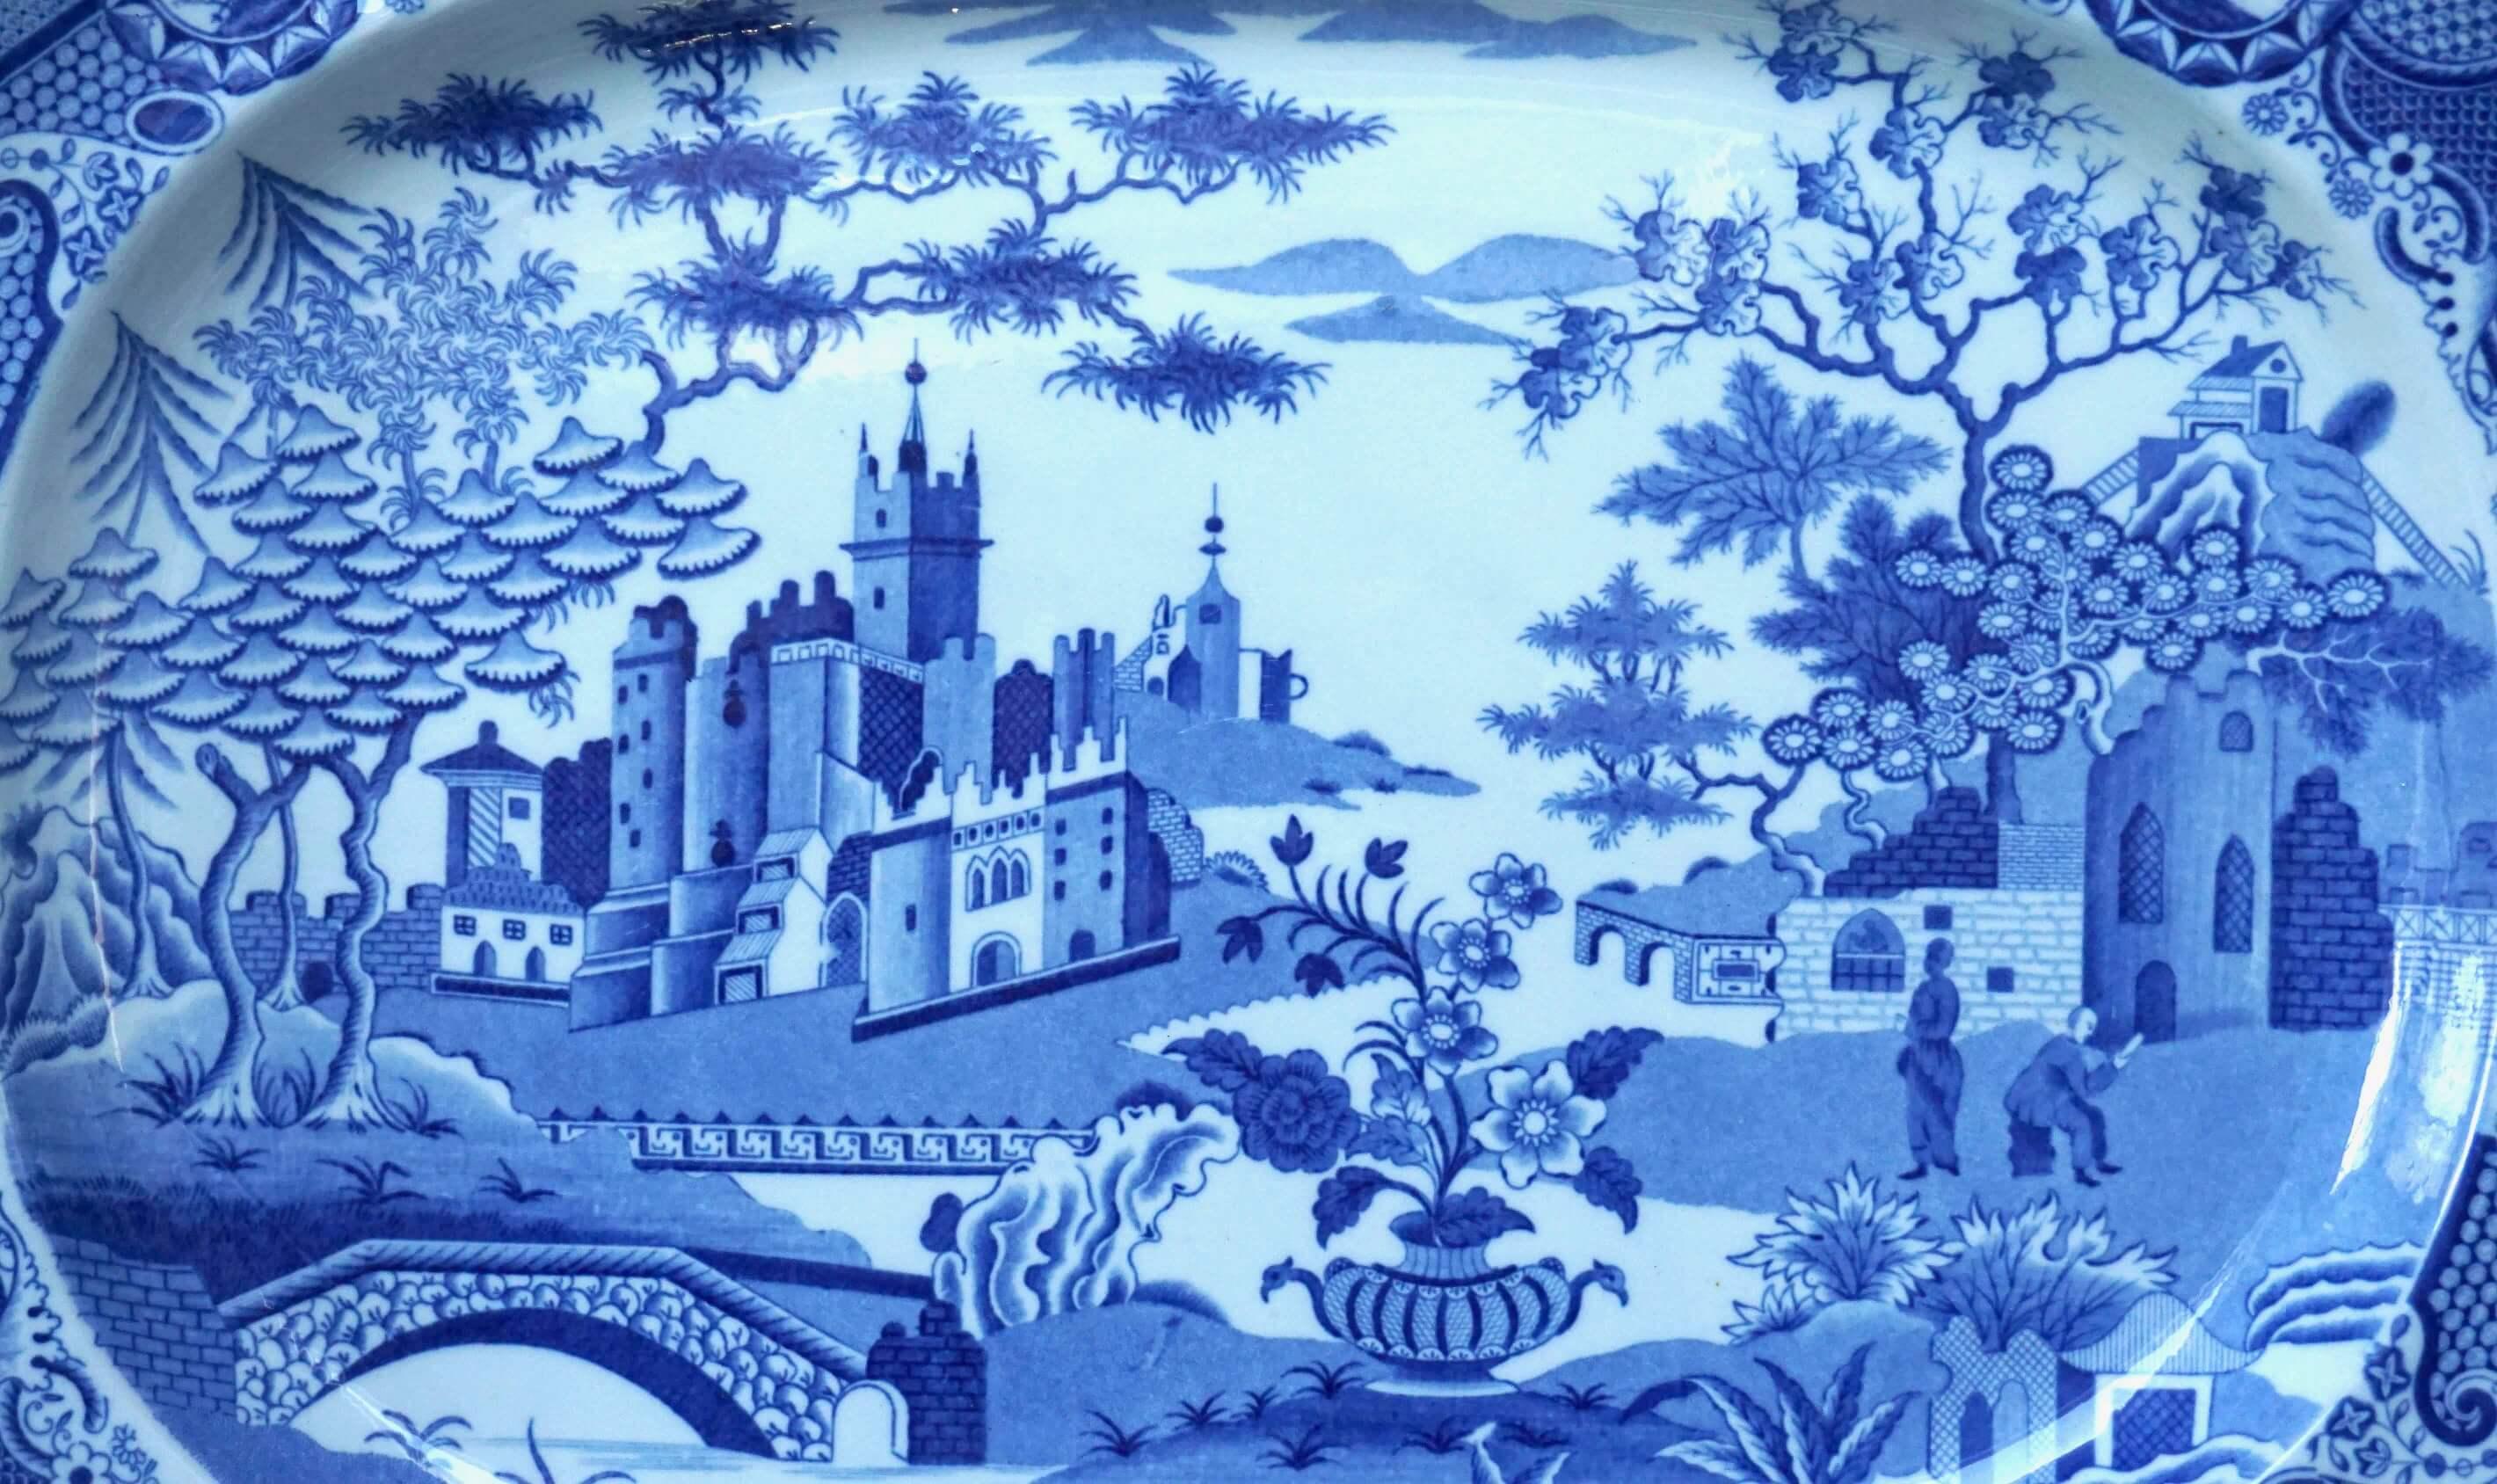 Regency Spode 'Gothic Castles' Large Blue and White Staffordshire Platter, circa 1815 For Sale